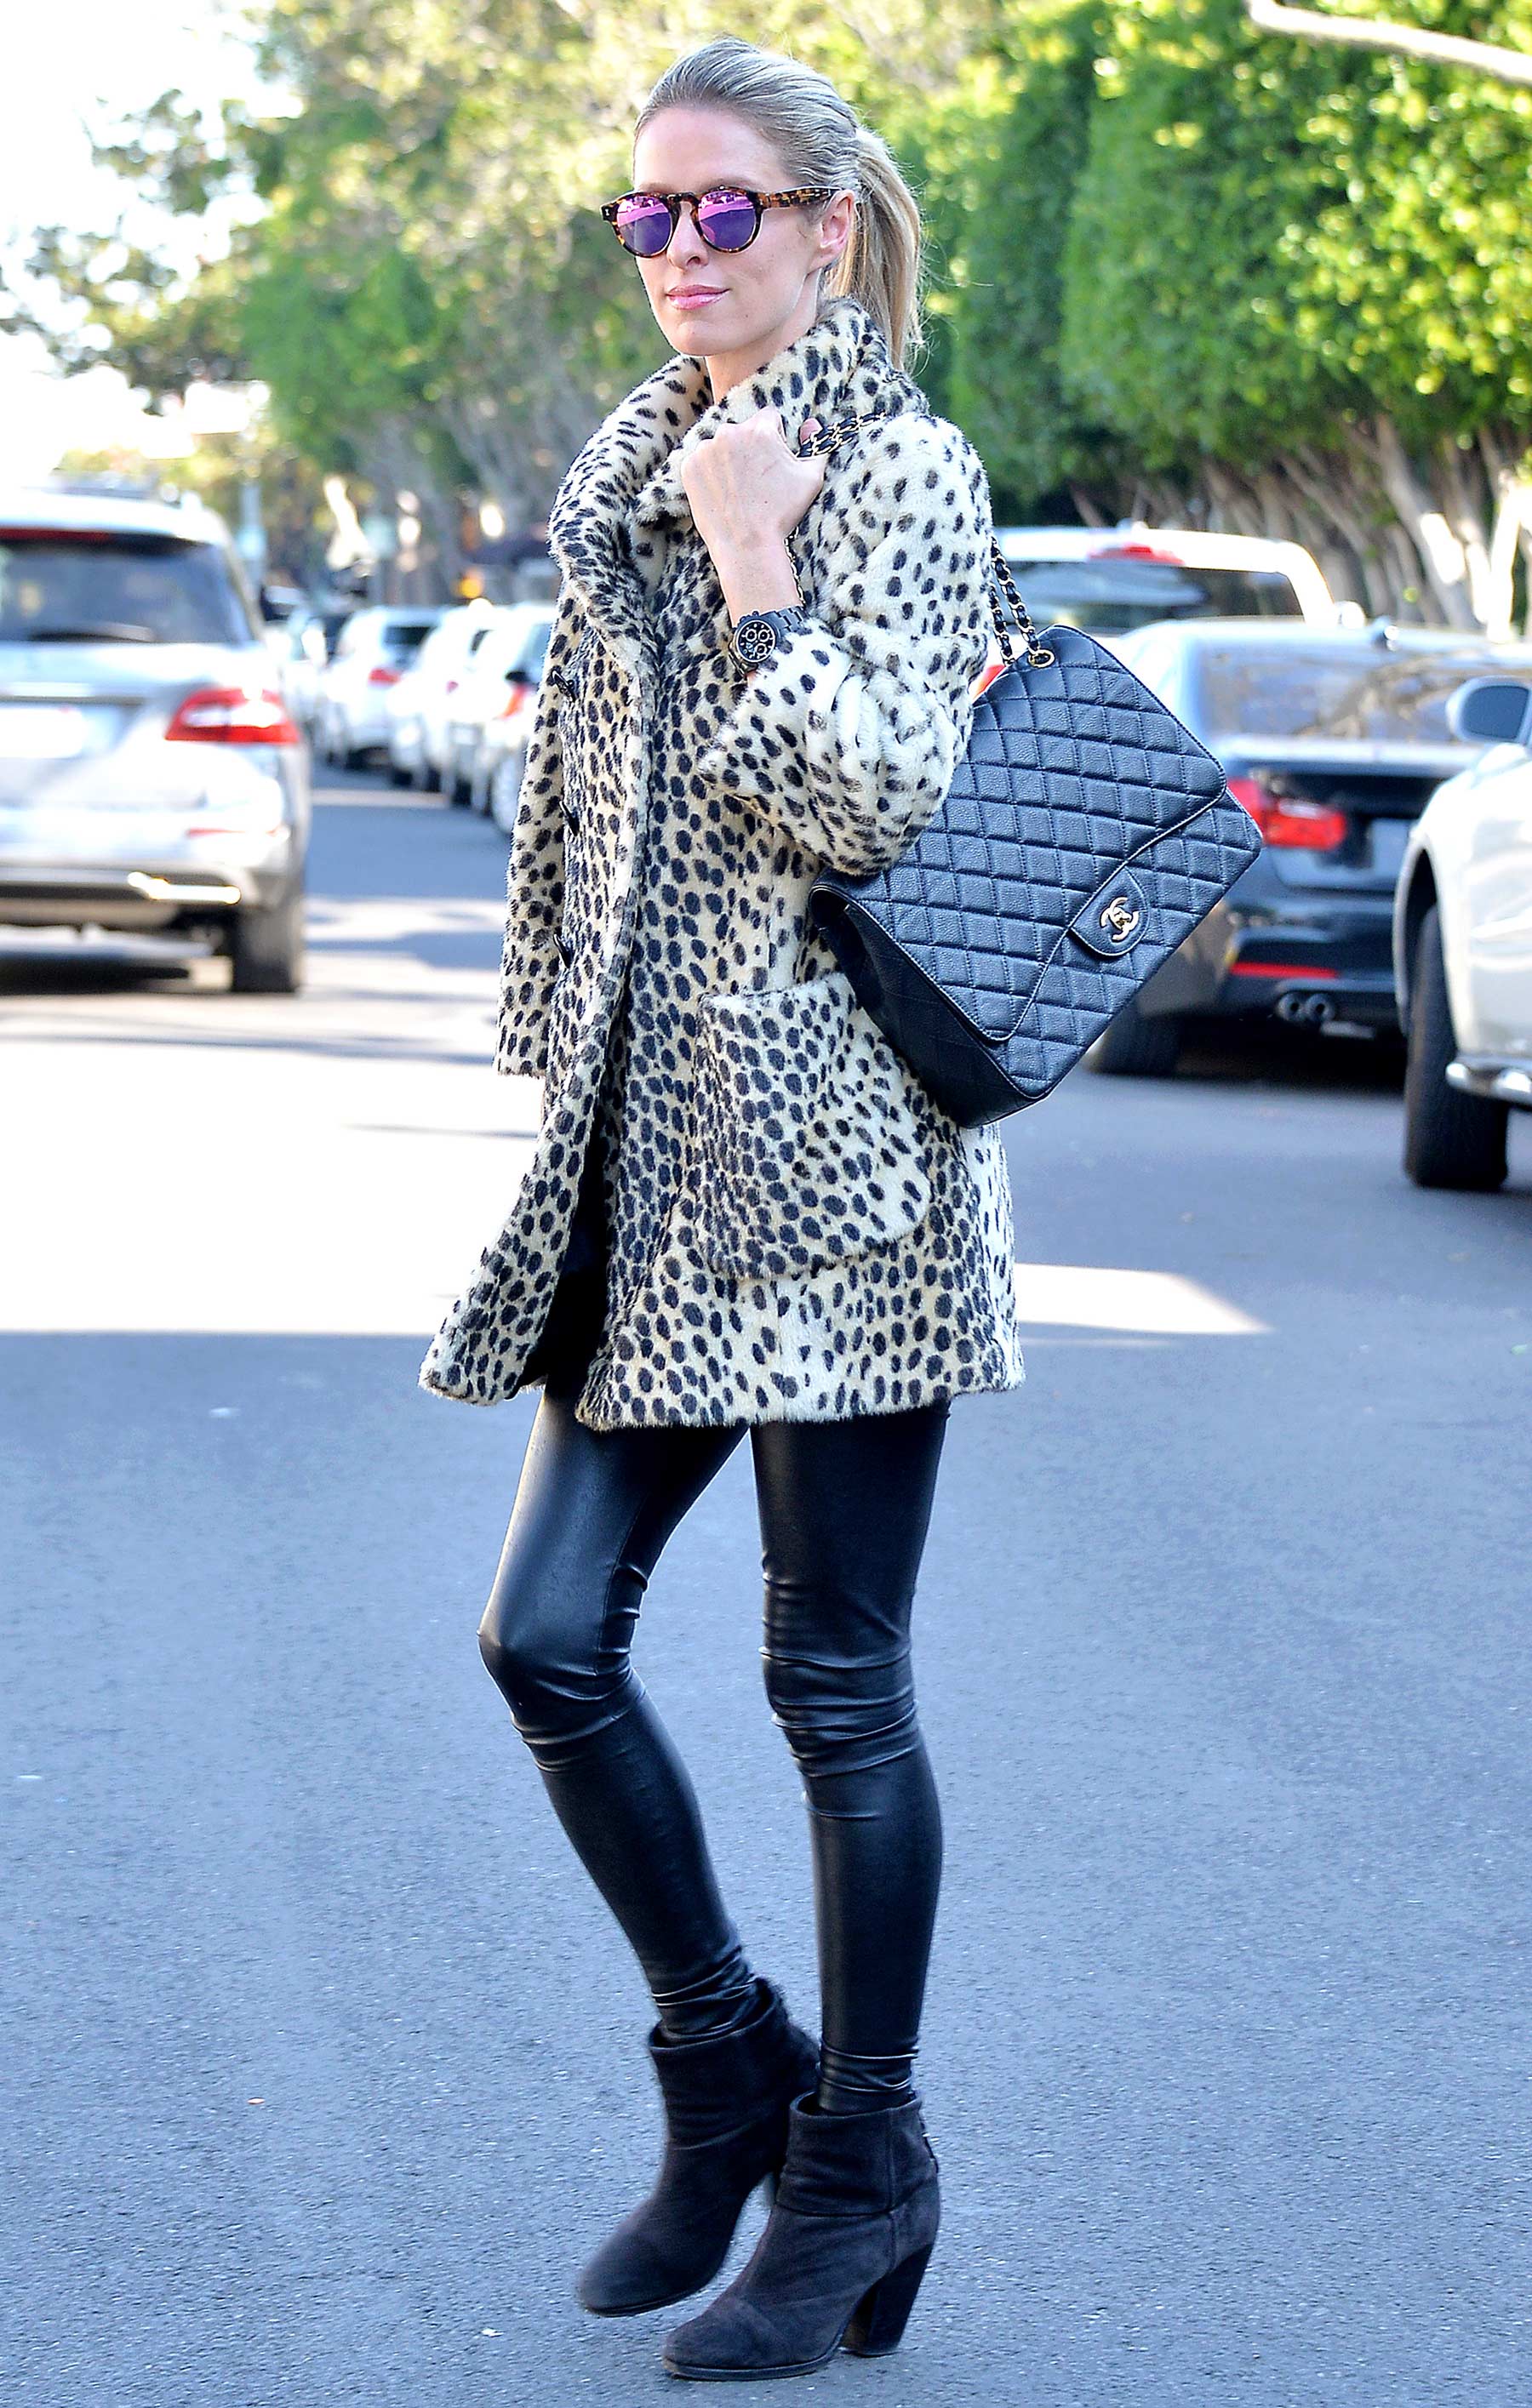 Nicky Hilton shopping in West Hollywood